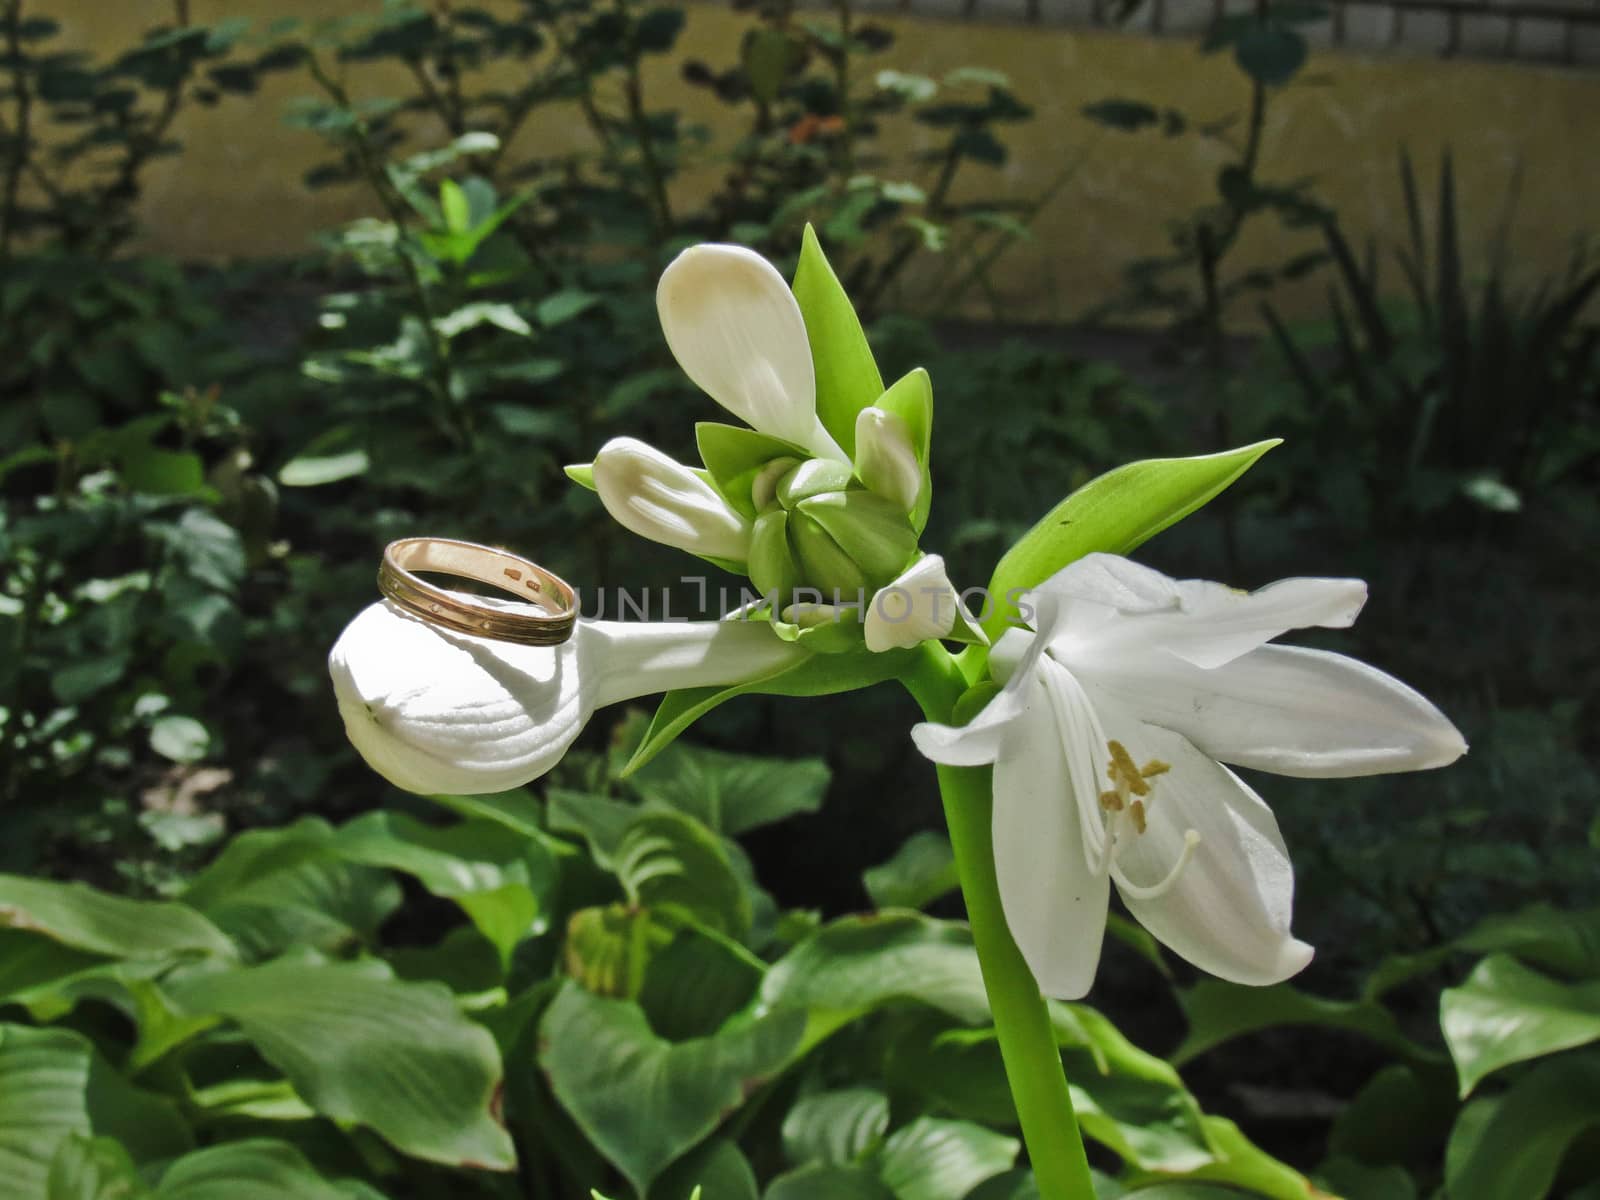 Ring of one of the white lily flower buds